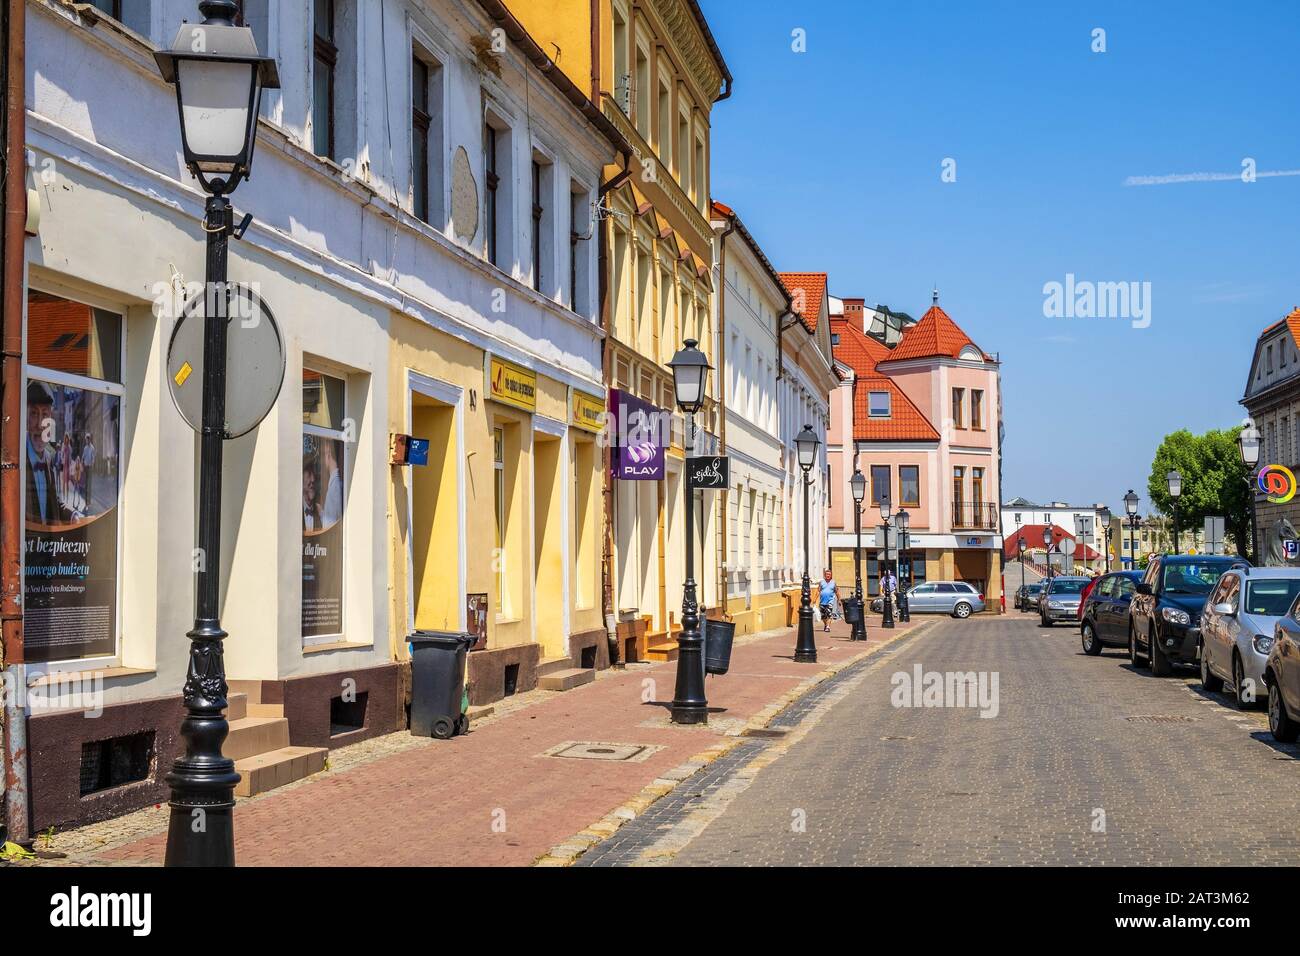 Konin, Greater Poland province / Poland - 2019/06/26: Historic tenements at the market square - Plac Wolnosci square - in the Old Town quarter of Konin, Poland Stock Photo